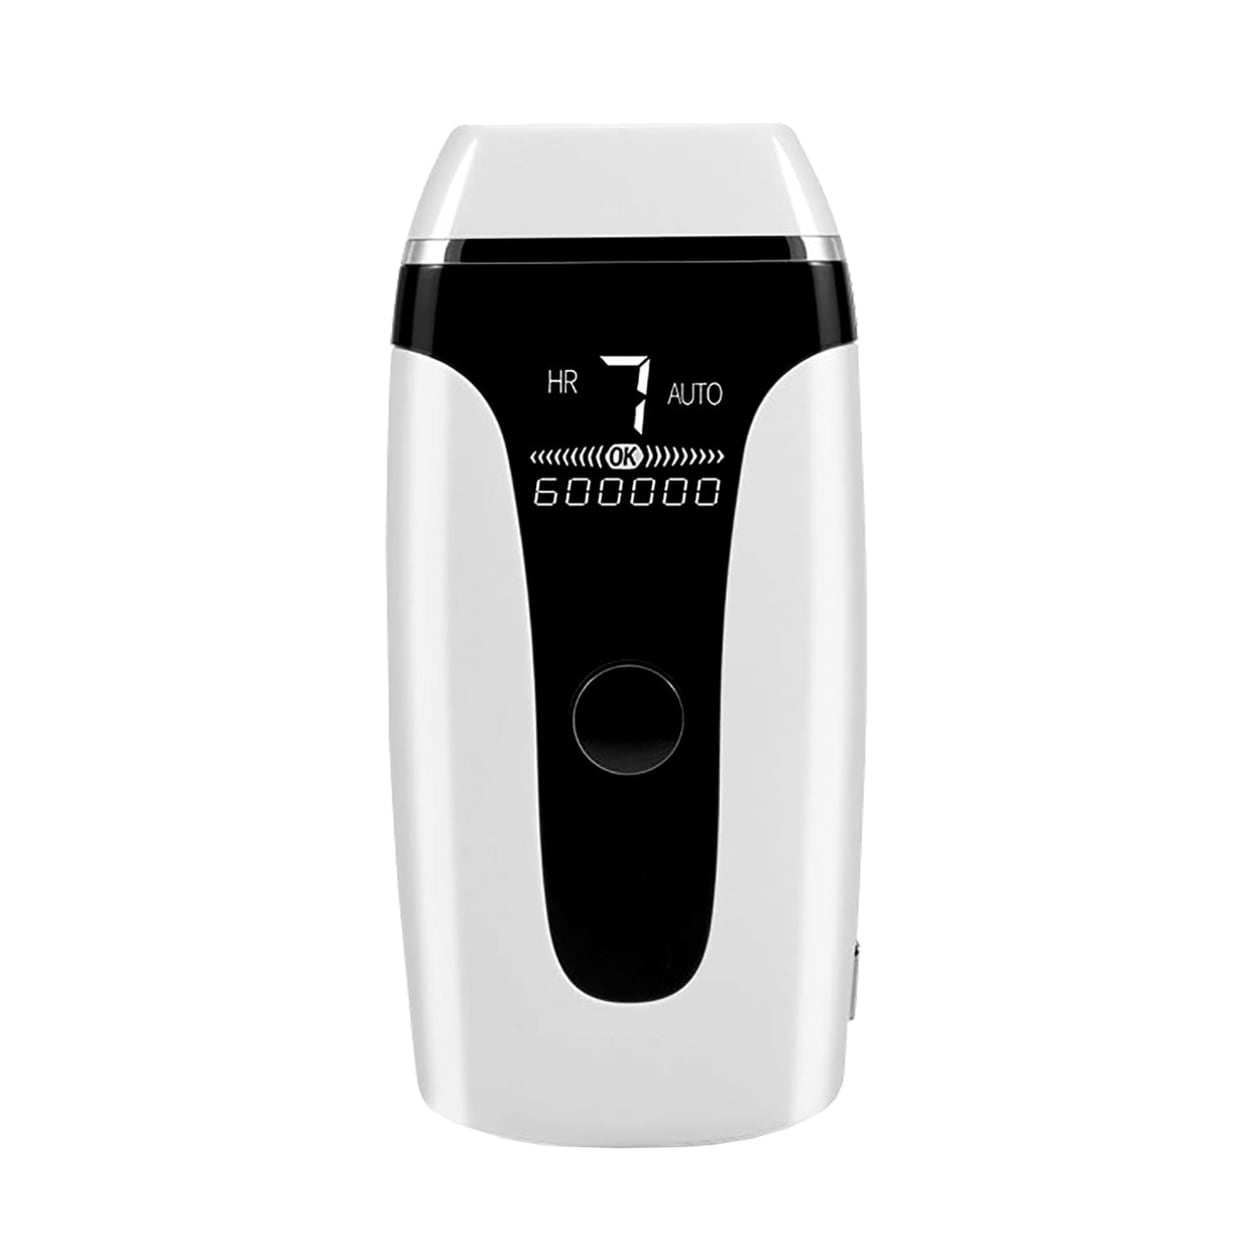 NUE IPL™ FDA Cleared Hair Removal